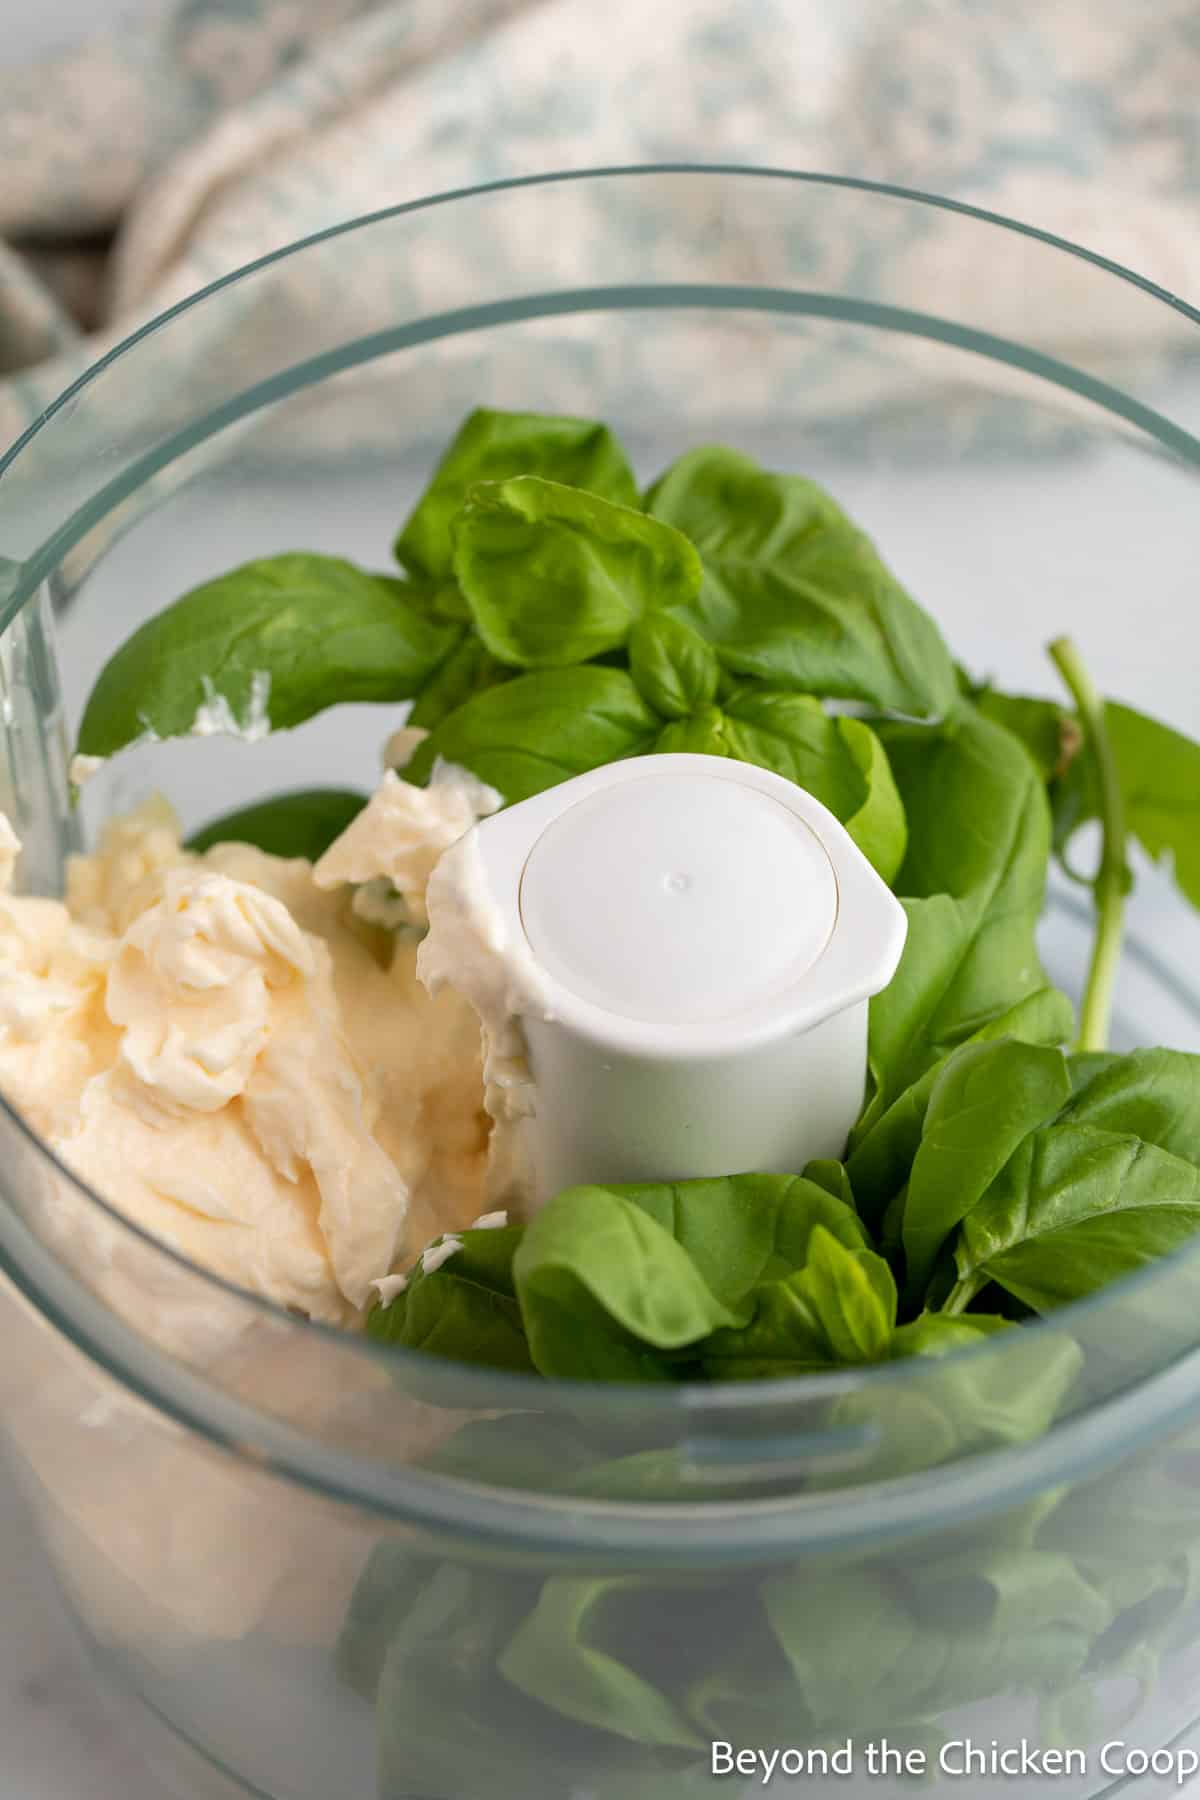 Basil and mayo in a food processor.